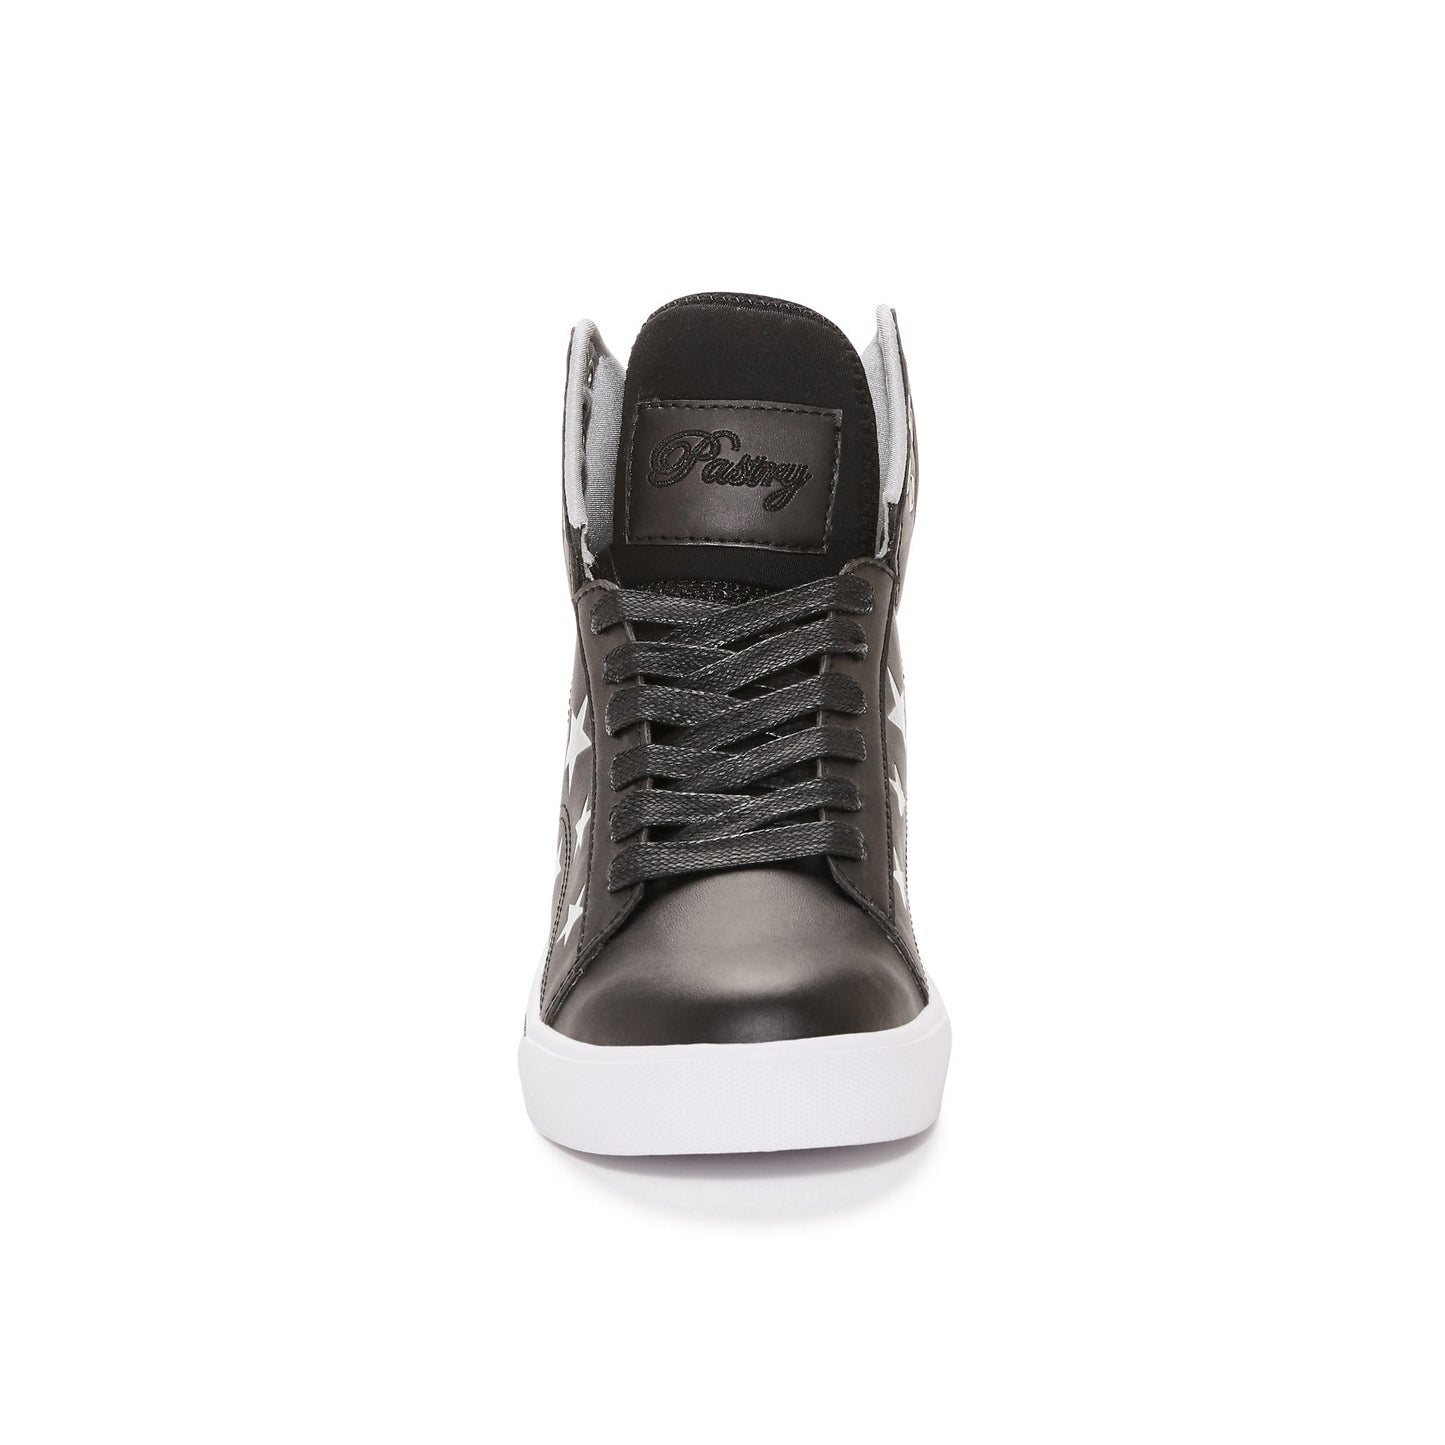 Pastry Pop Tart Star Youth Sneaker in Black/Silver front view